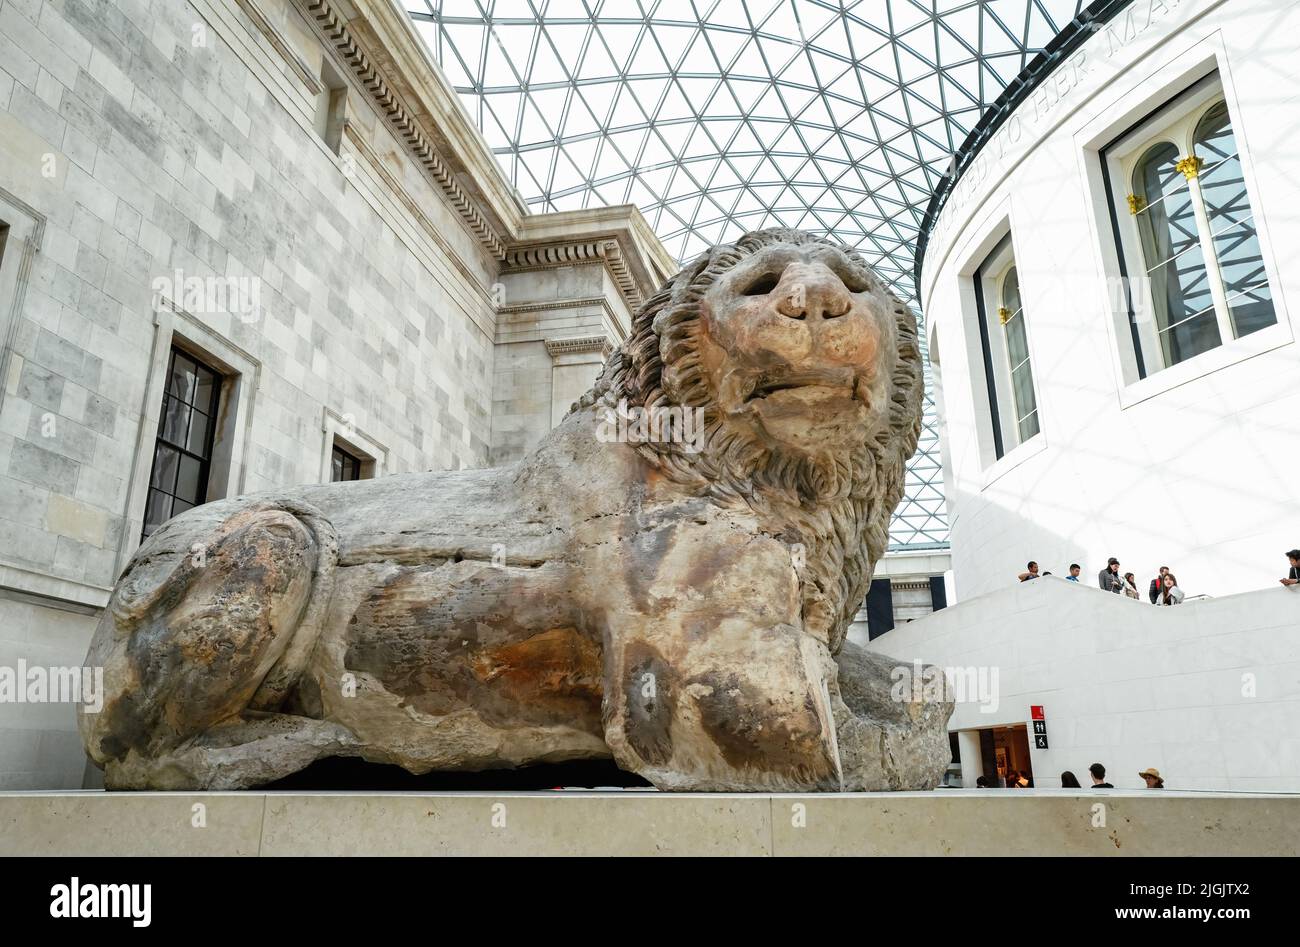 London, UK - 18th April 2022: The Lion of Knidos, a colossal Hellenistic marble statue of a recumbent lion dating from 2nd century BC, displayed in th Stock Photo